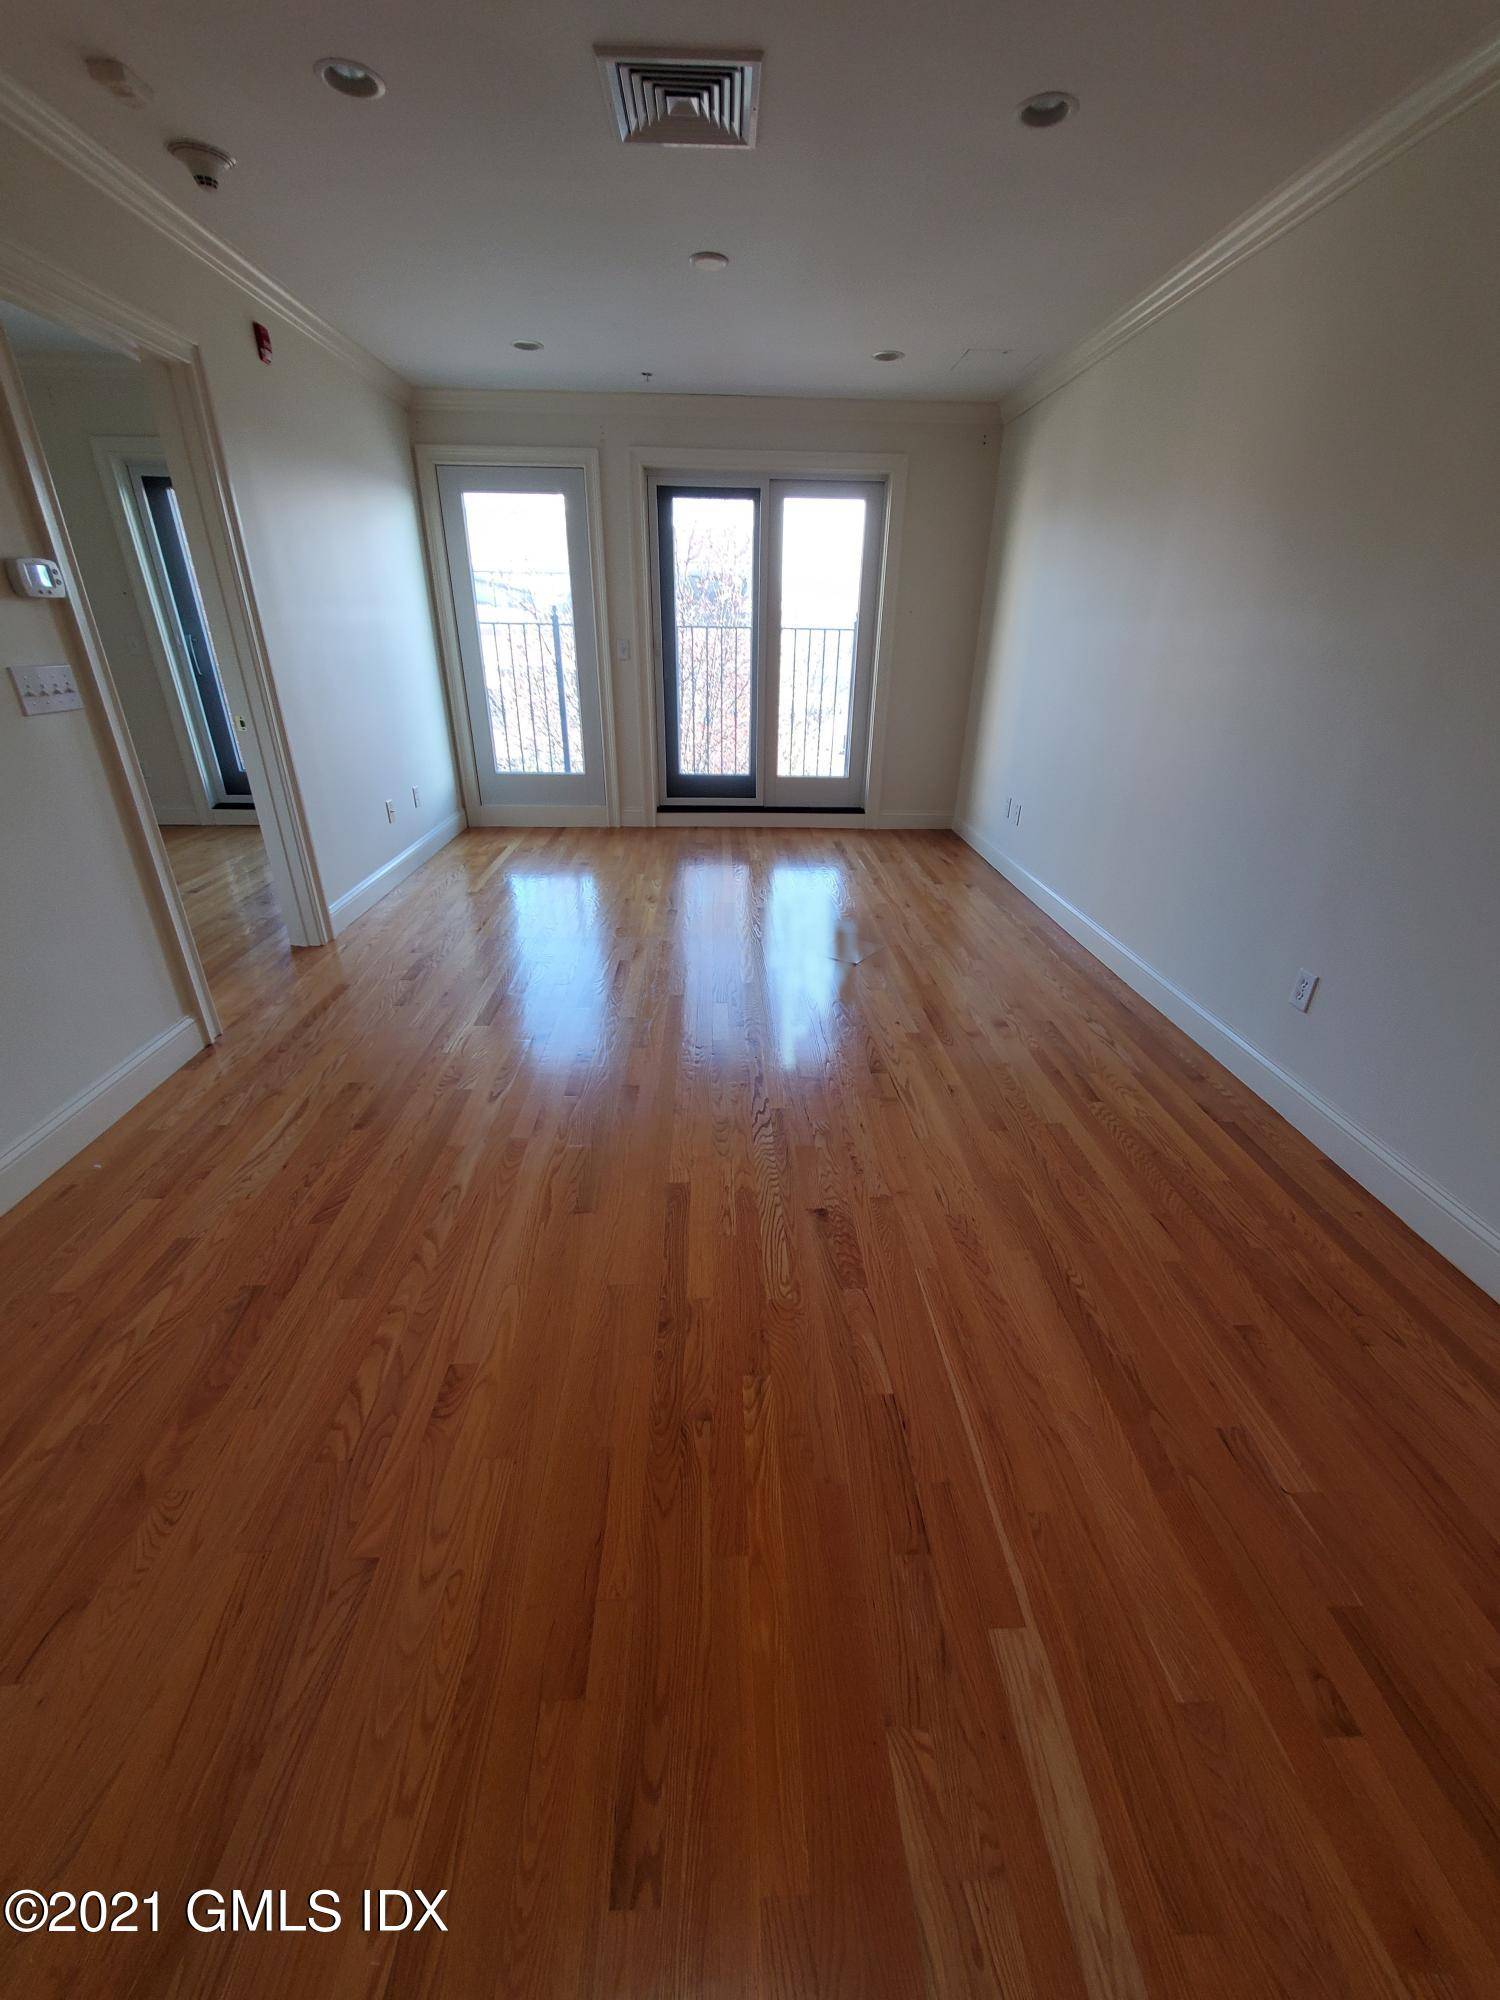 Oversized one bedroom 1. 5 bathroom apartment in prime downtown Greenwich location overlooking Greenwich Avenue.